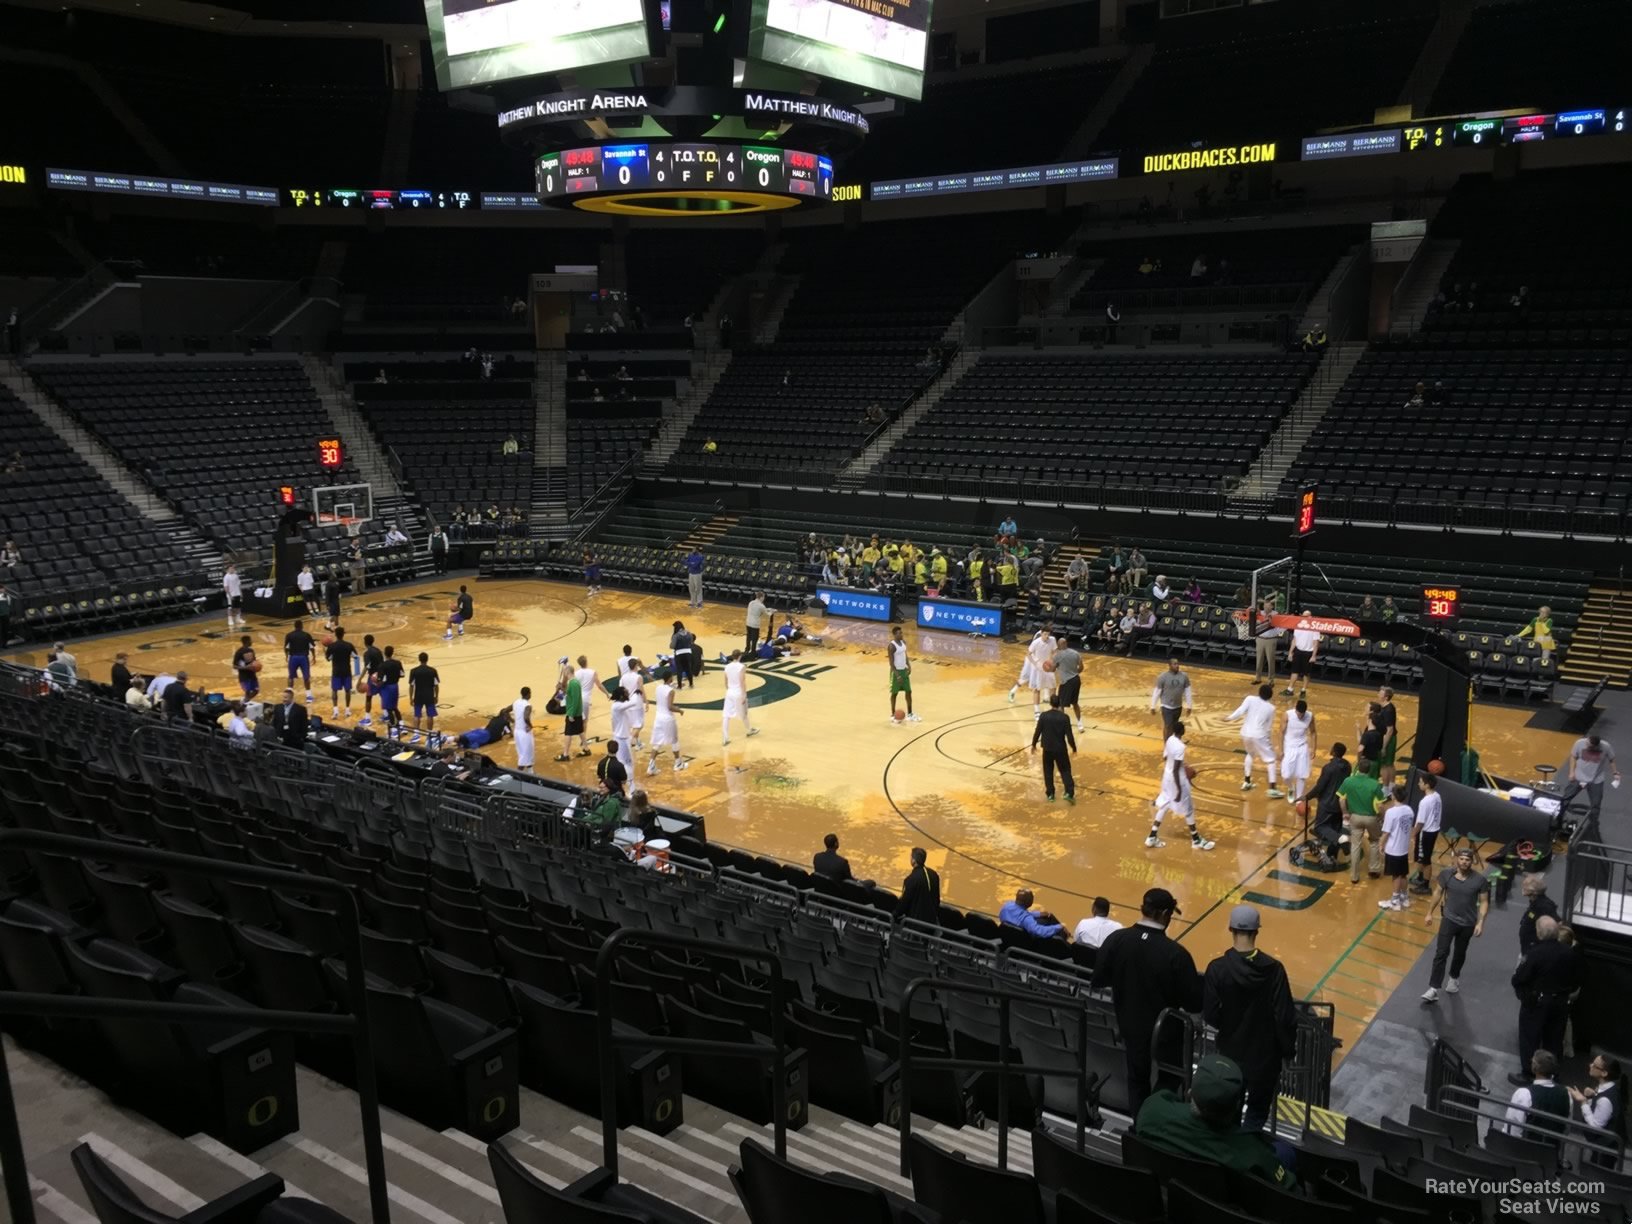 section 101, row k seat view  - matthew knight arena